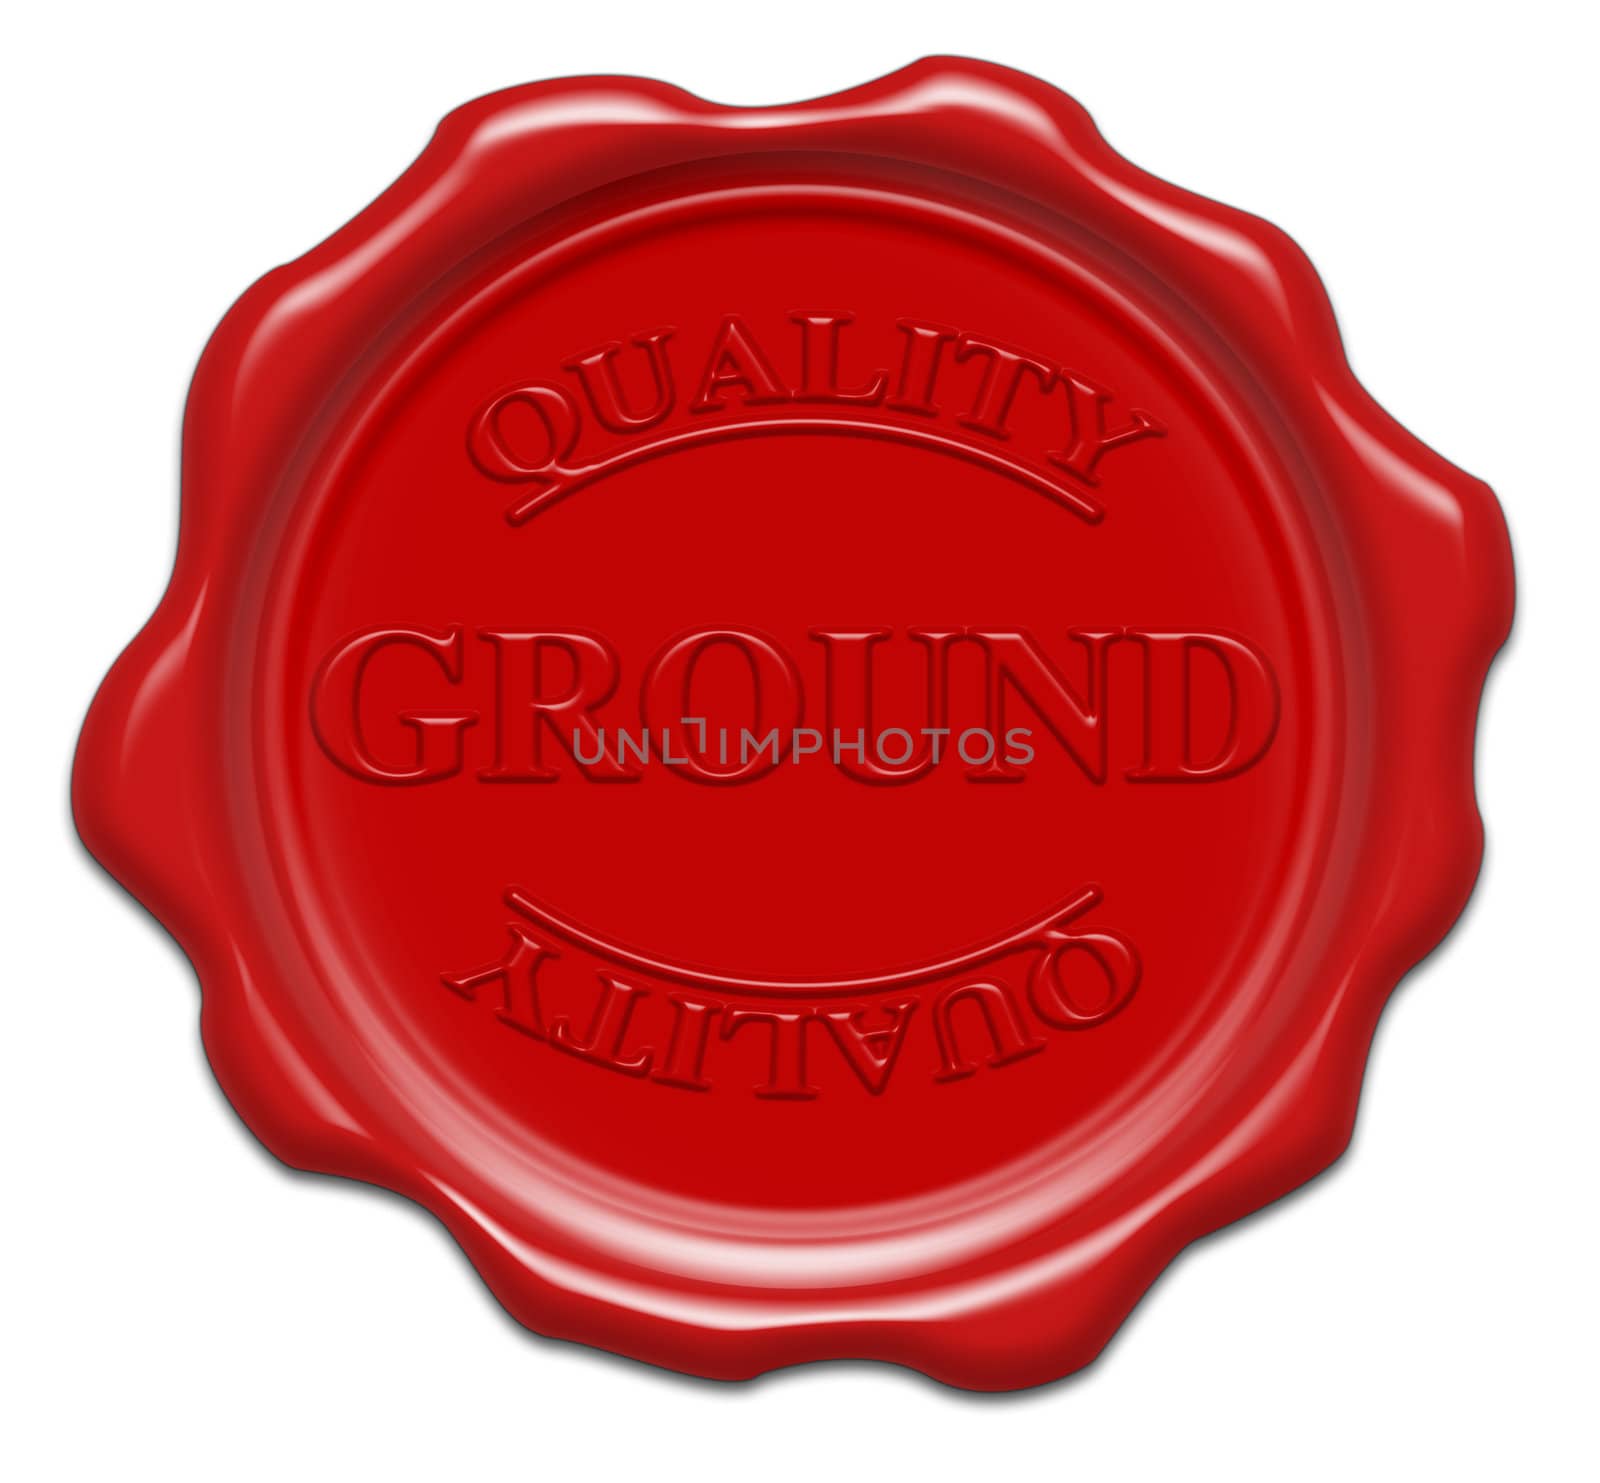 quality ground - illustration red wax seal isolated on white bac by mozzyb